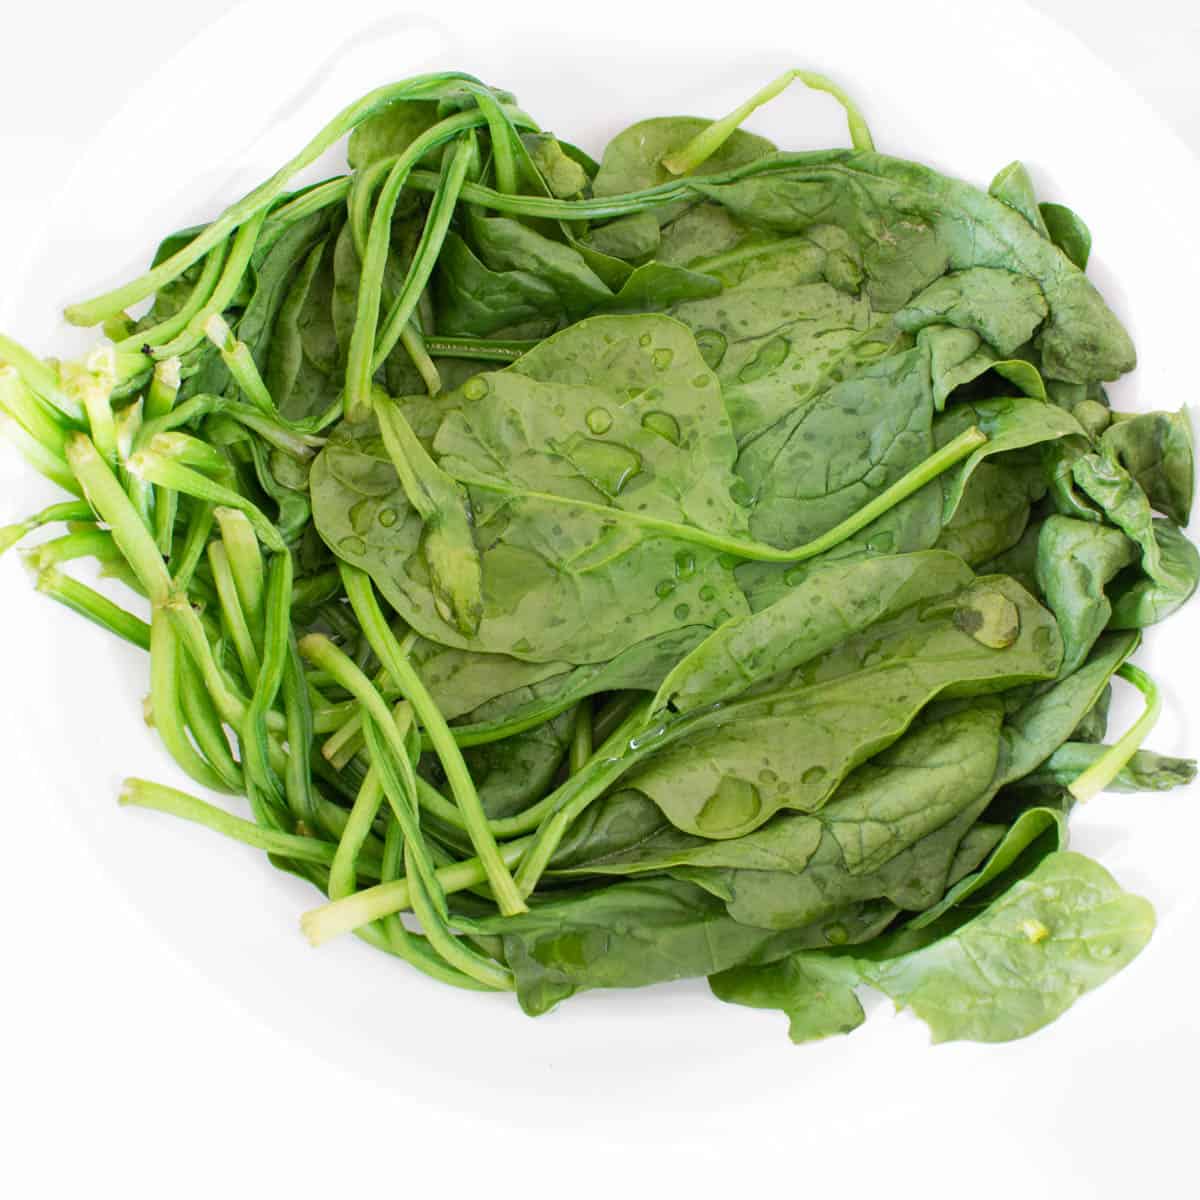 blanched spinach in a bowl.